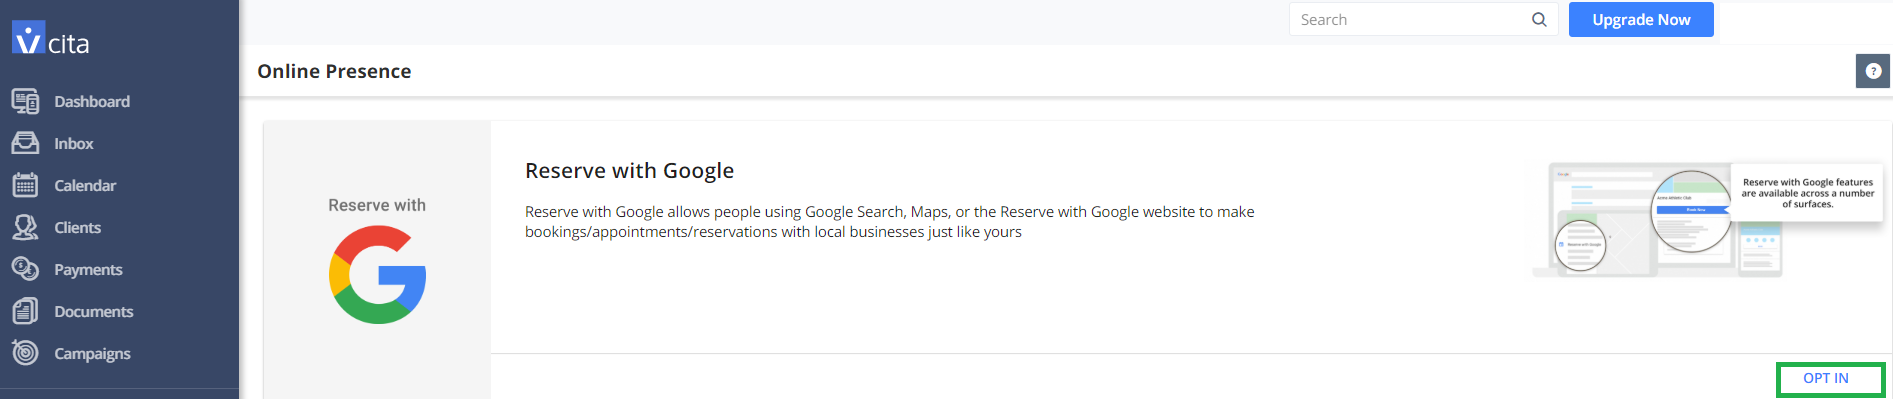 How to join Reserve with Google